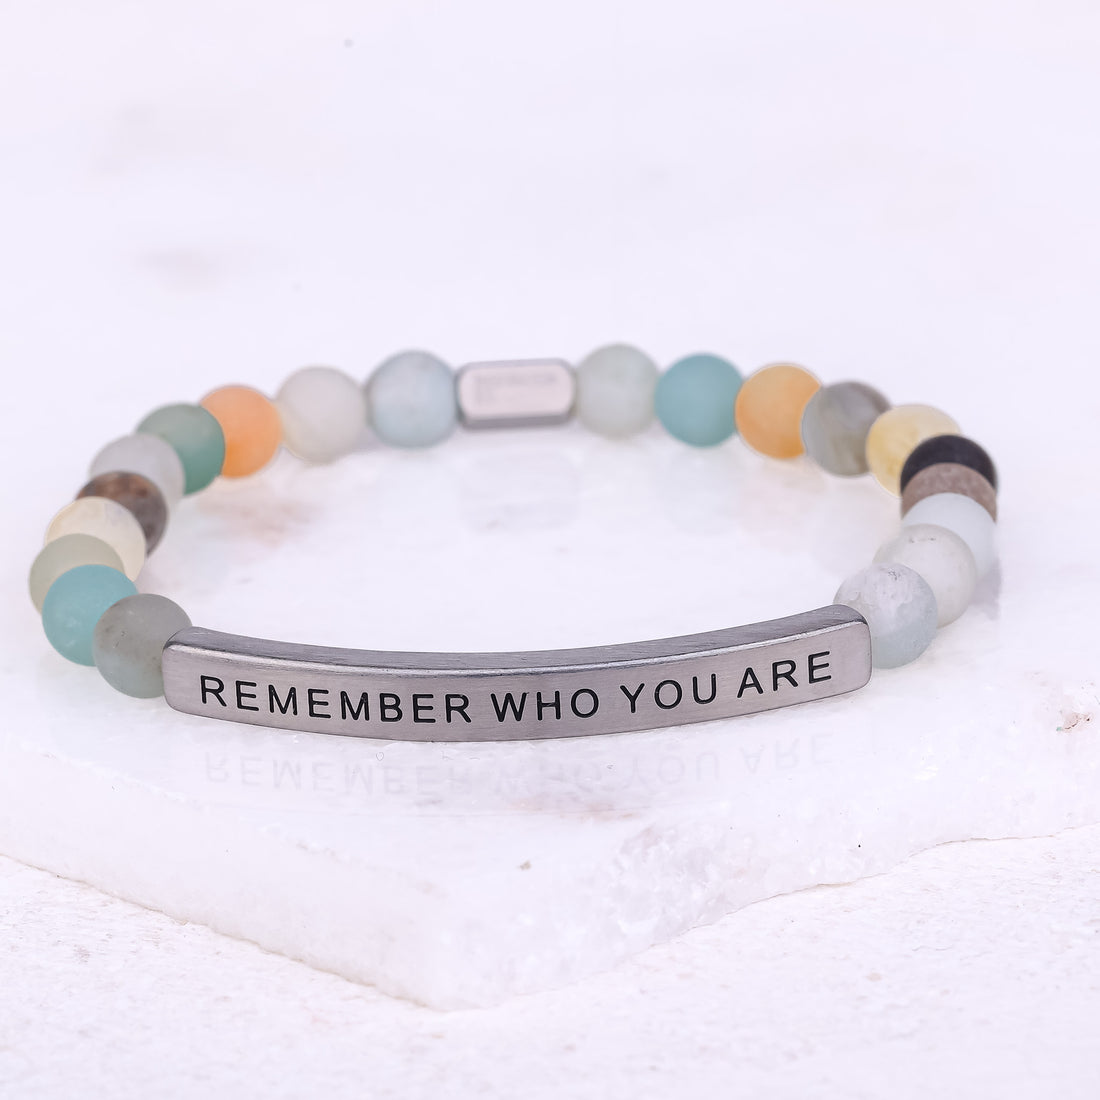 REMEMBER WHO YOU ARE